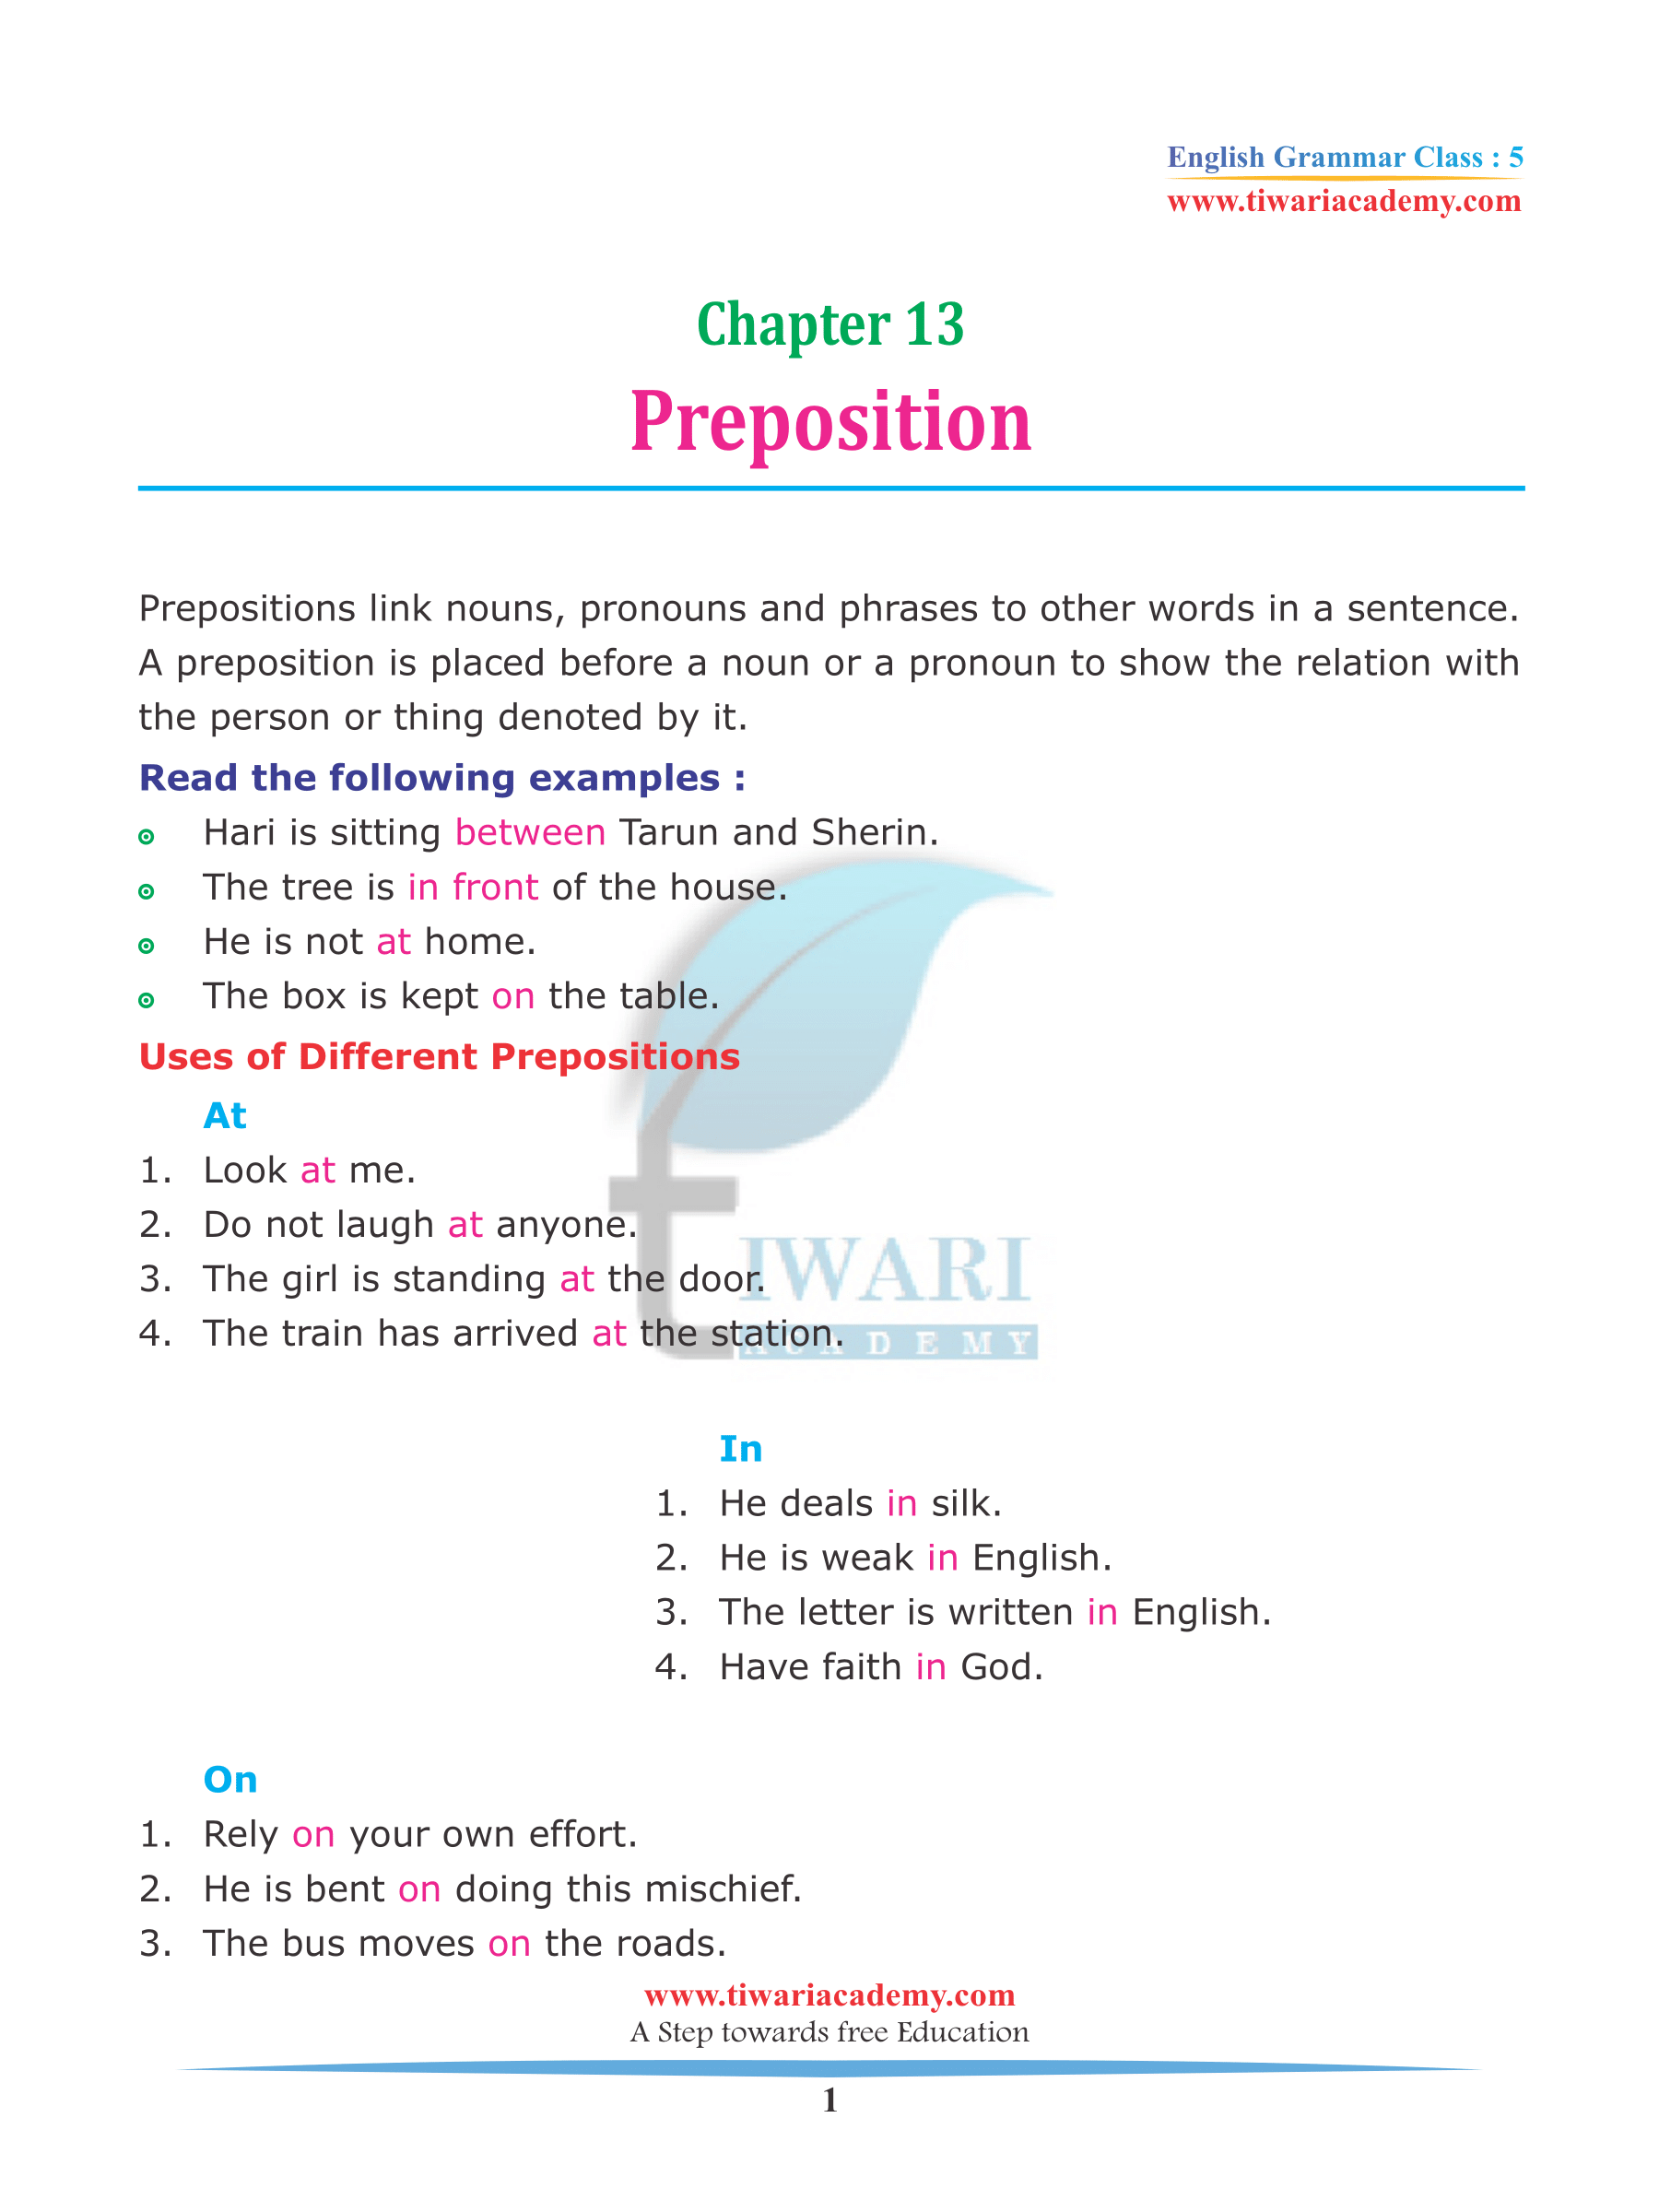 class-5-english-grammar-chapter-13-prepositions-updated-for-2022-2023